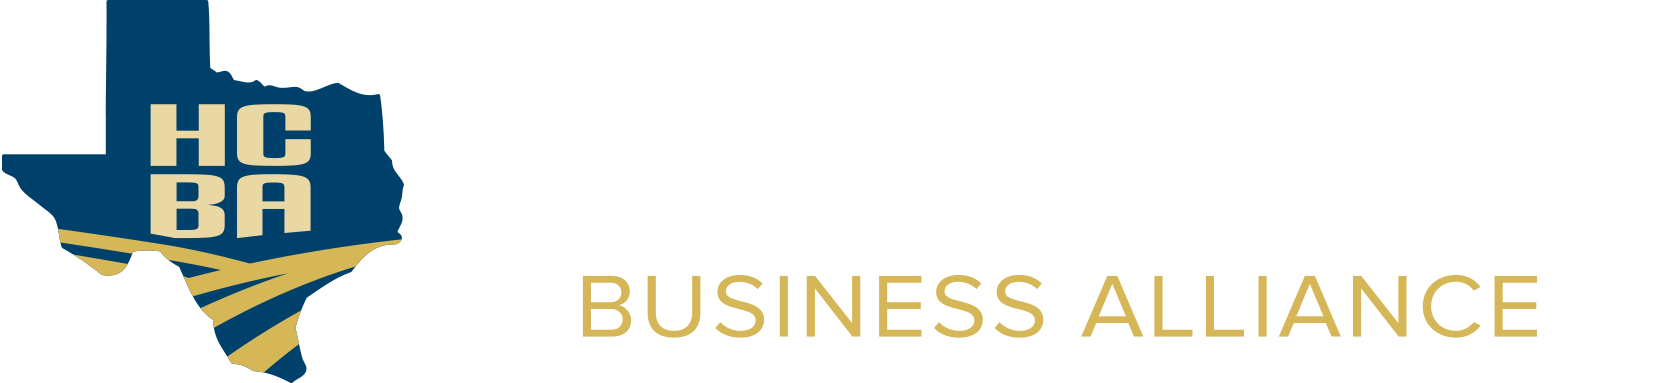 Hill Country Business Alliance